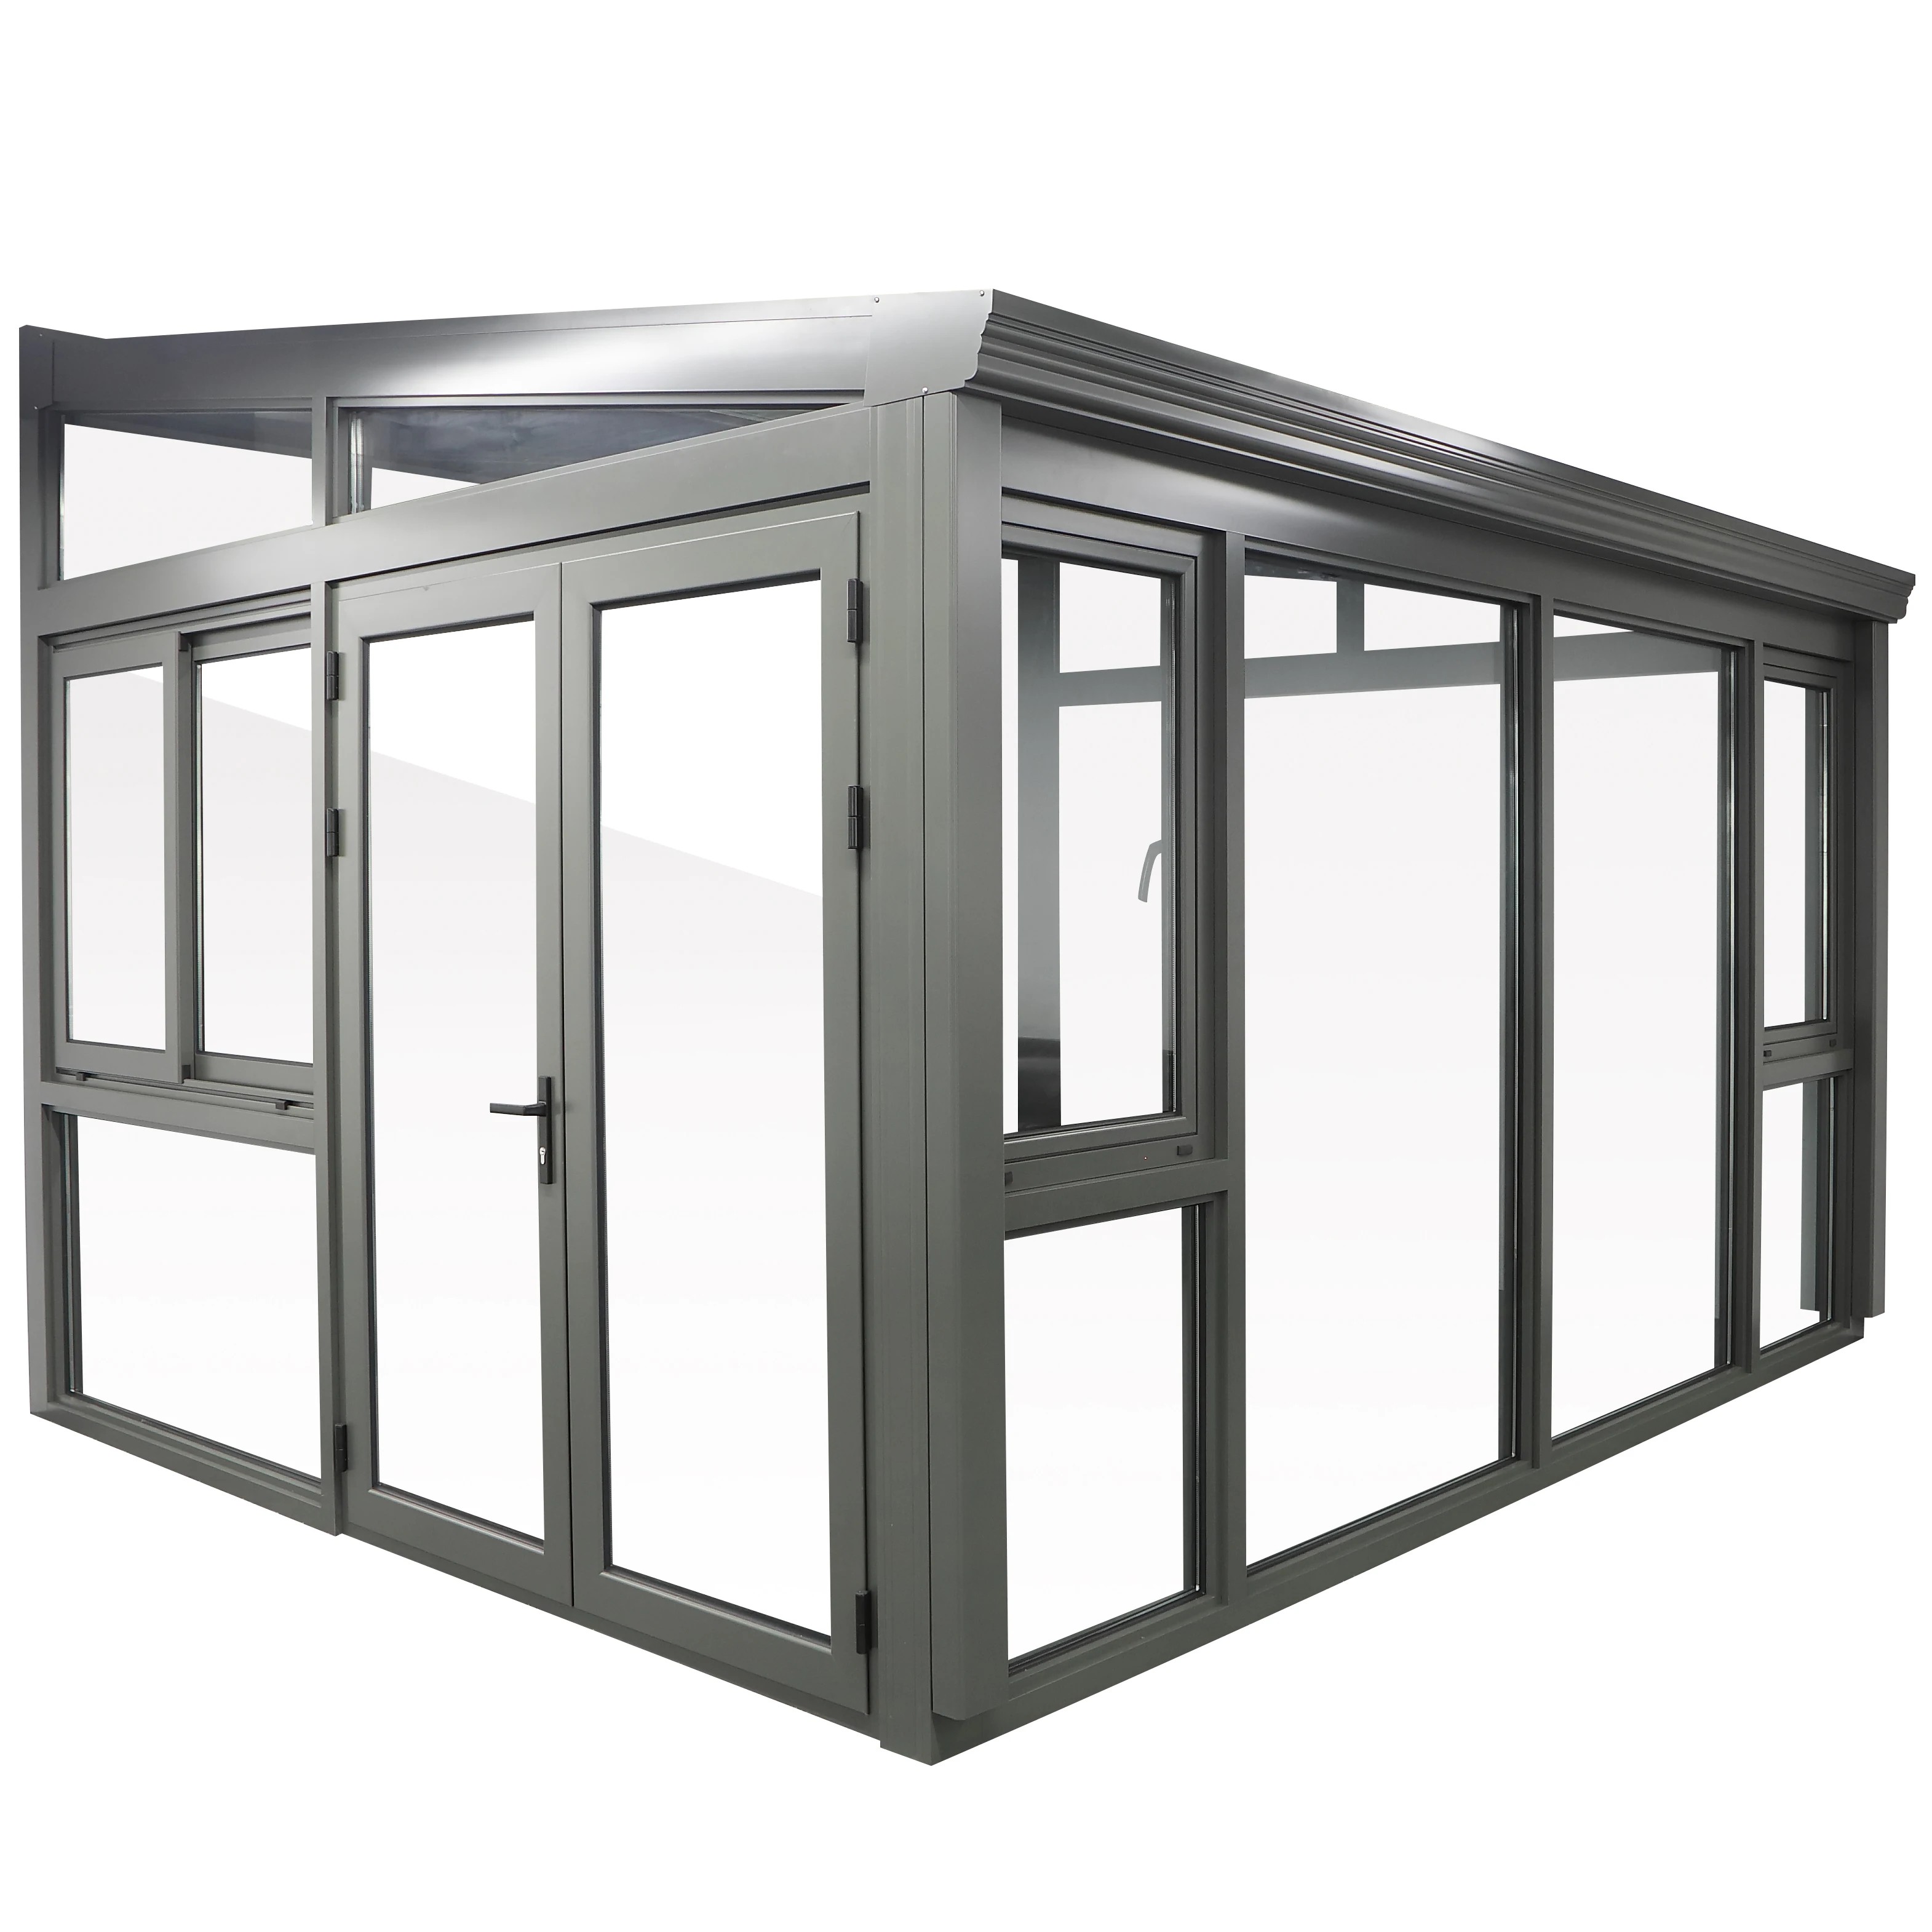 Aluminium Sunroom For Diy With Polycarbonate Roof Buy Sunroom For Diy Glass Sunroom Veranda Sunroom Product On Alibaba Com